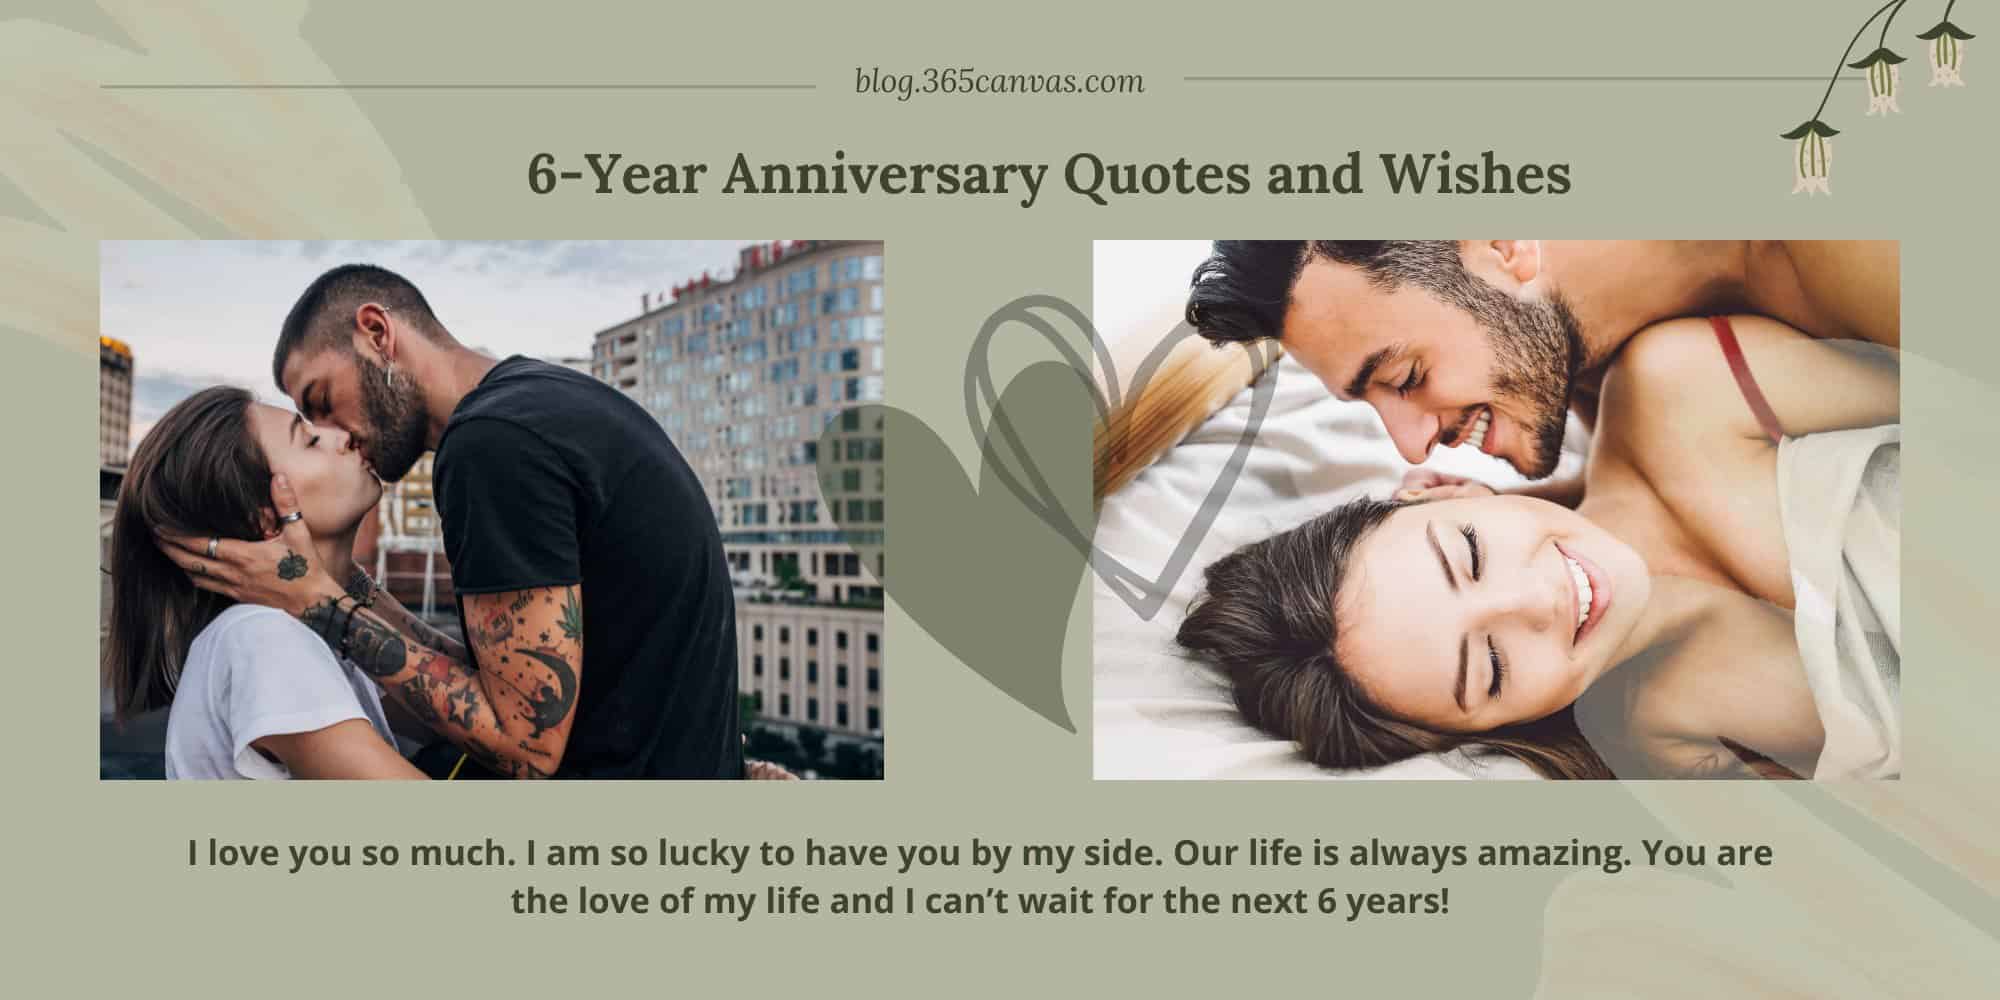 100+ Heart-touching 6th Year Iron Wedding Anniversary Quotes, Wishes